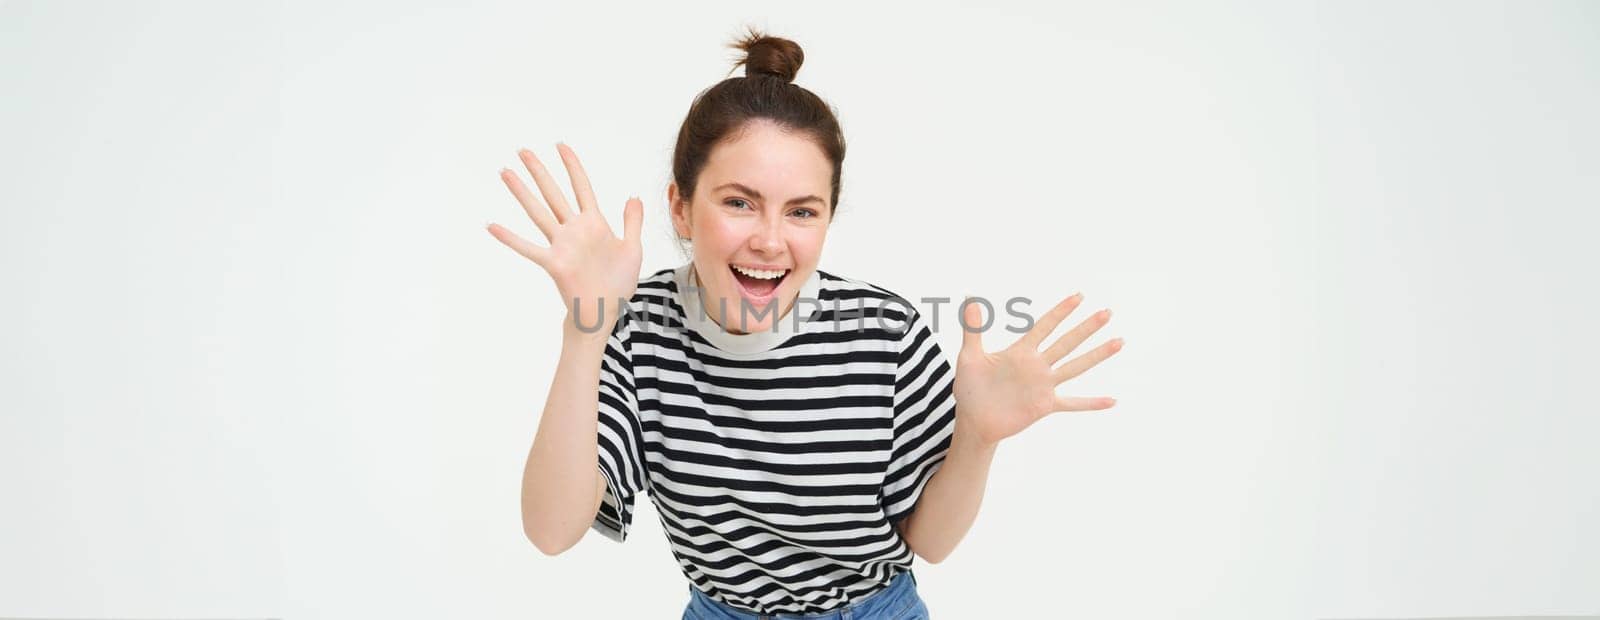 Image of happy, beautiful young woman makes jazz hands, surprise gesture, posing in casual t-shirt and jeans over white background.